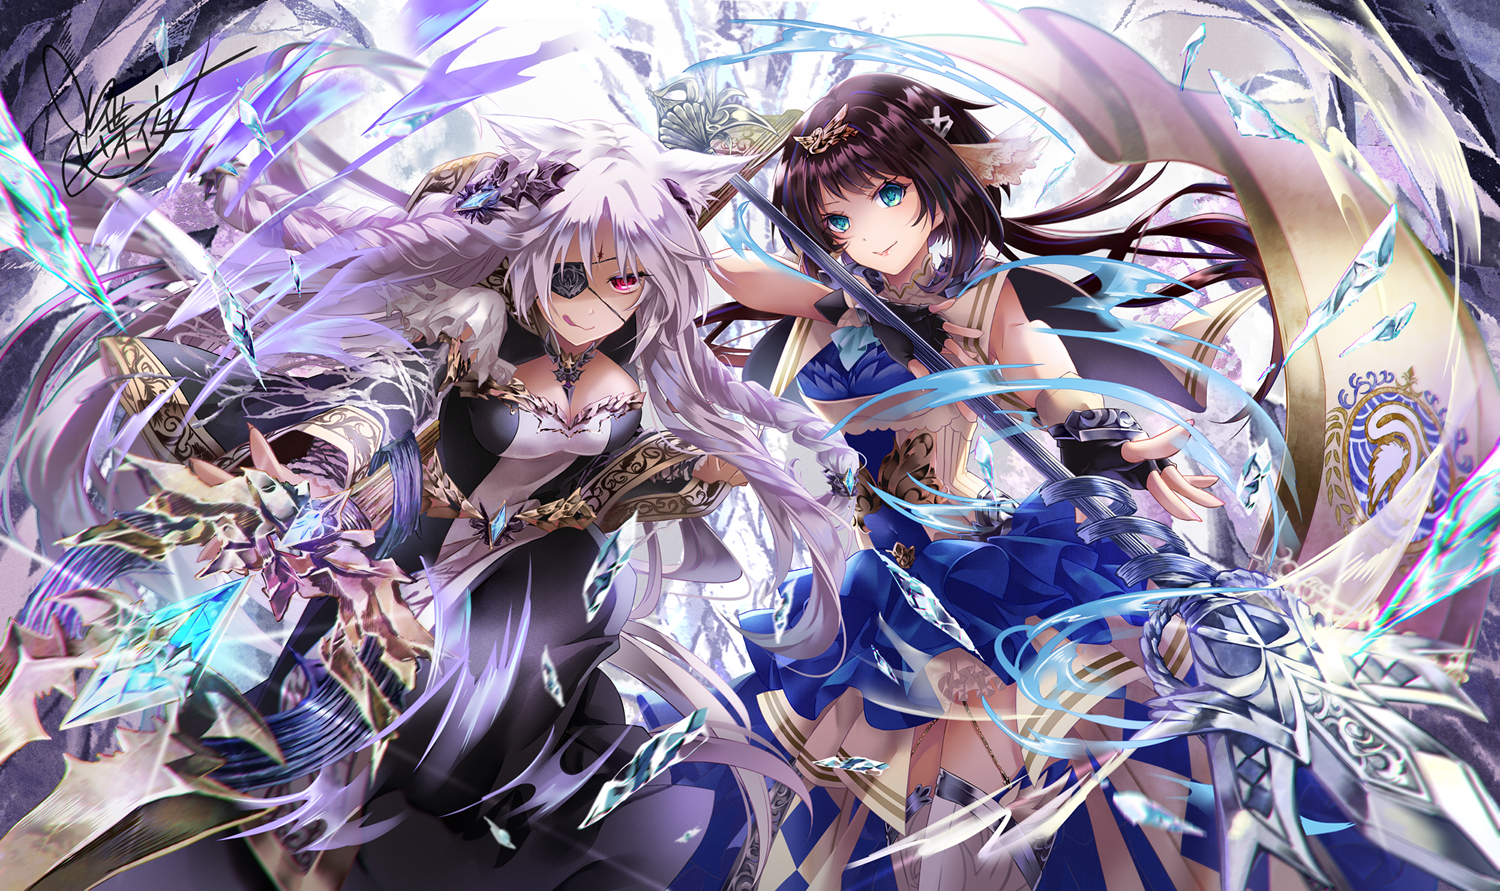 Anime 1500x891 anime anime girls animal ears spear eyepatches blue eyes long hair wolf girls wolf ears looking at viewer signature lance weapon tongue out smiling skirt frills